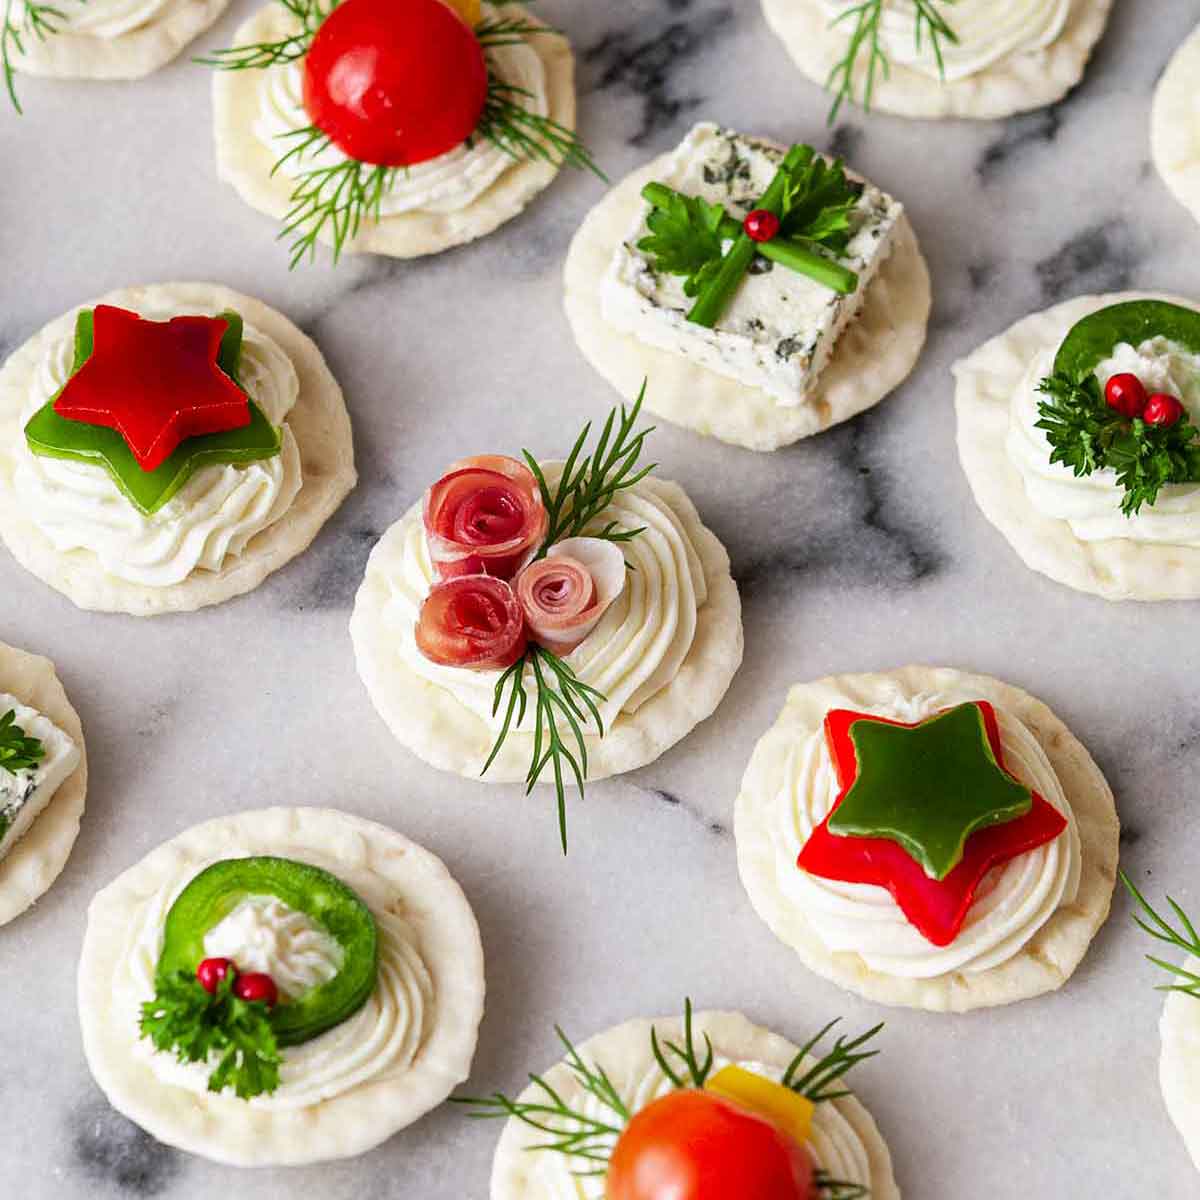 An assortment of festive appetizers on marble.